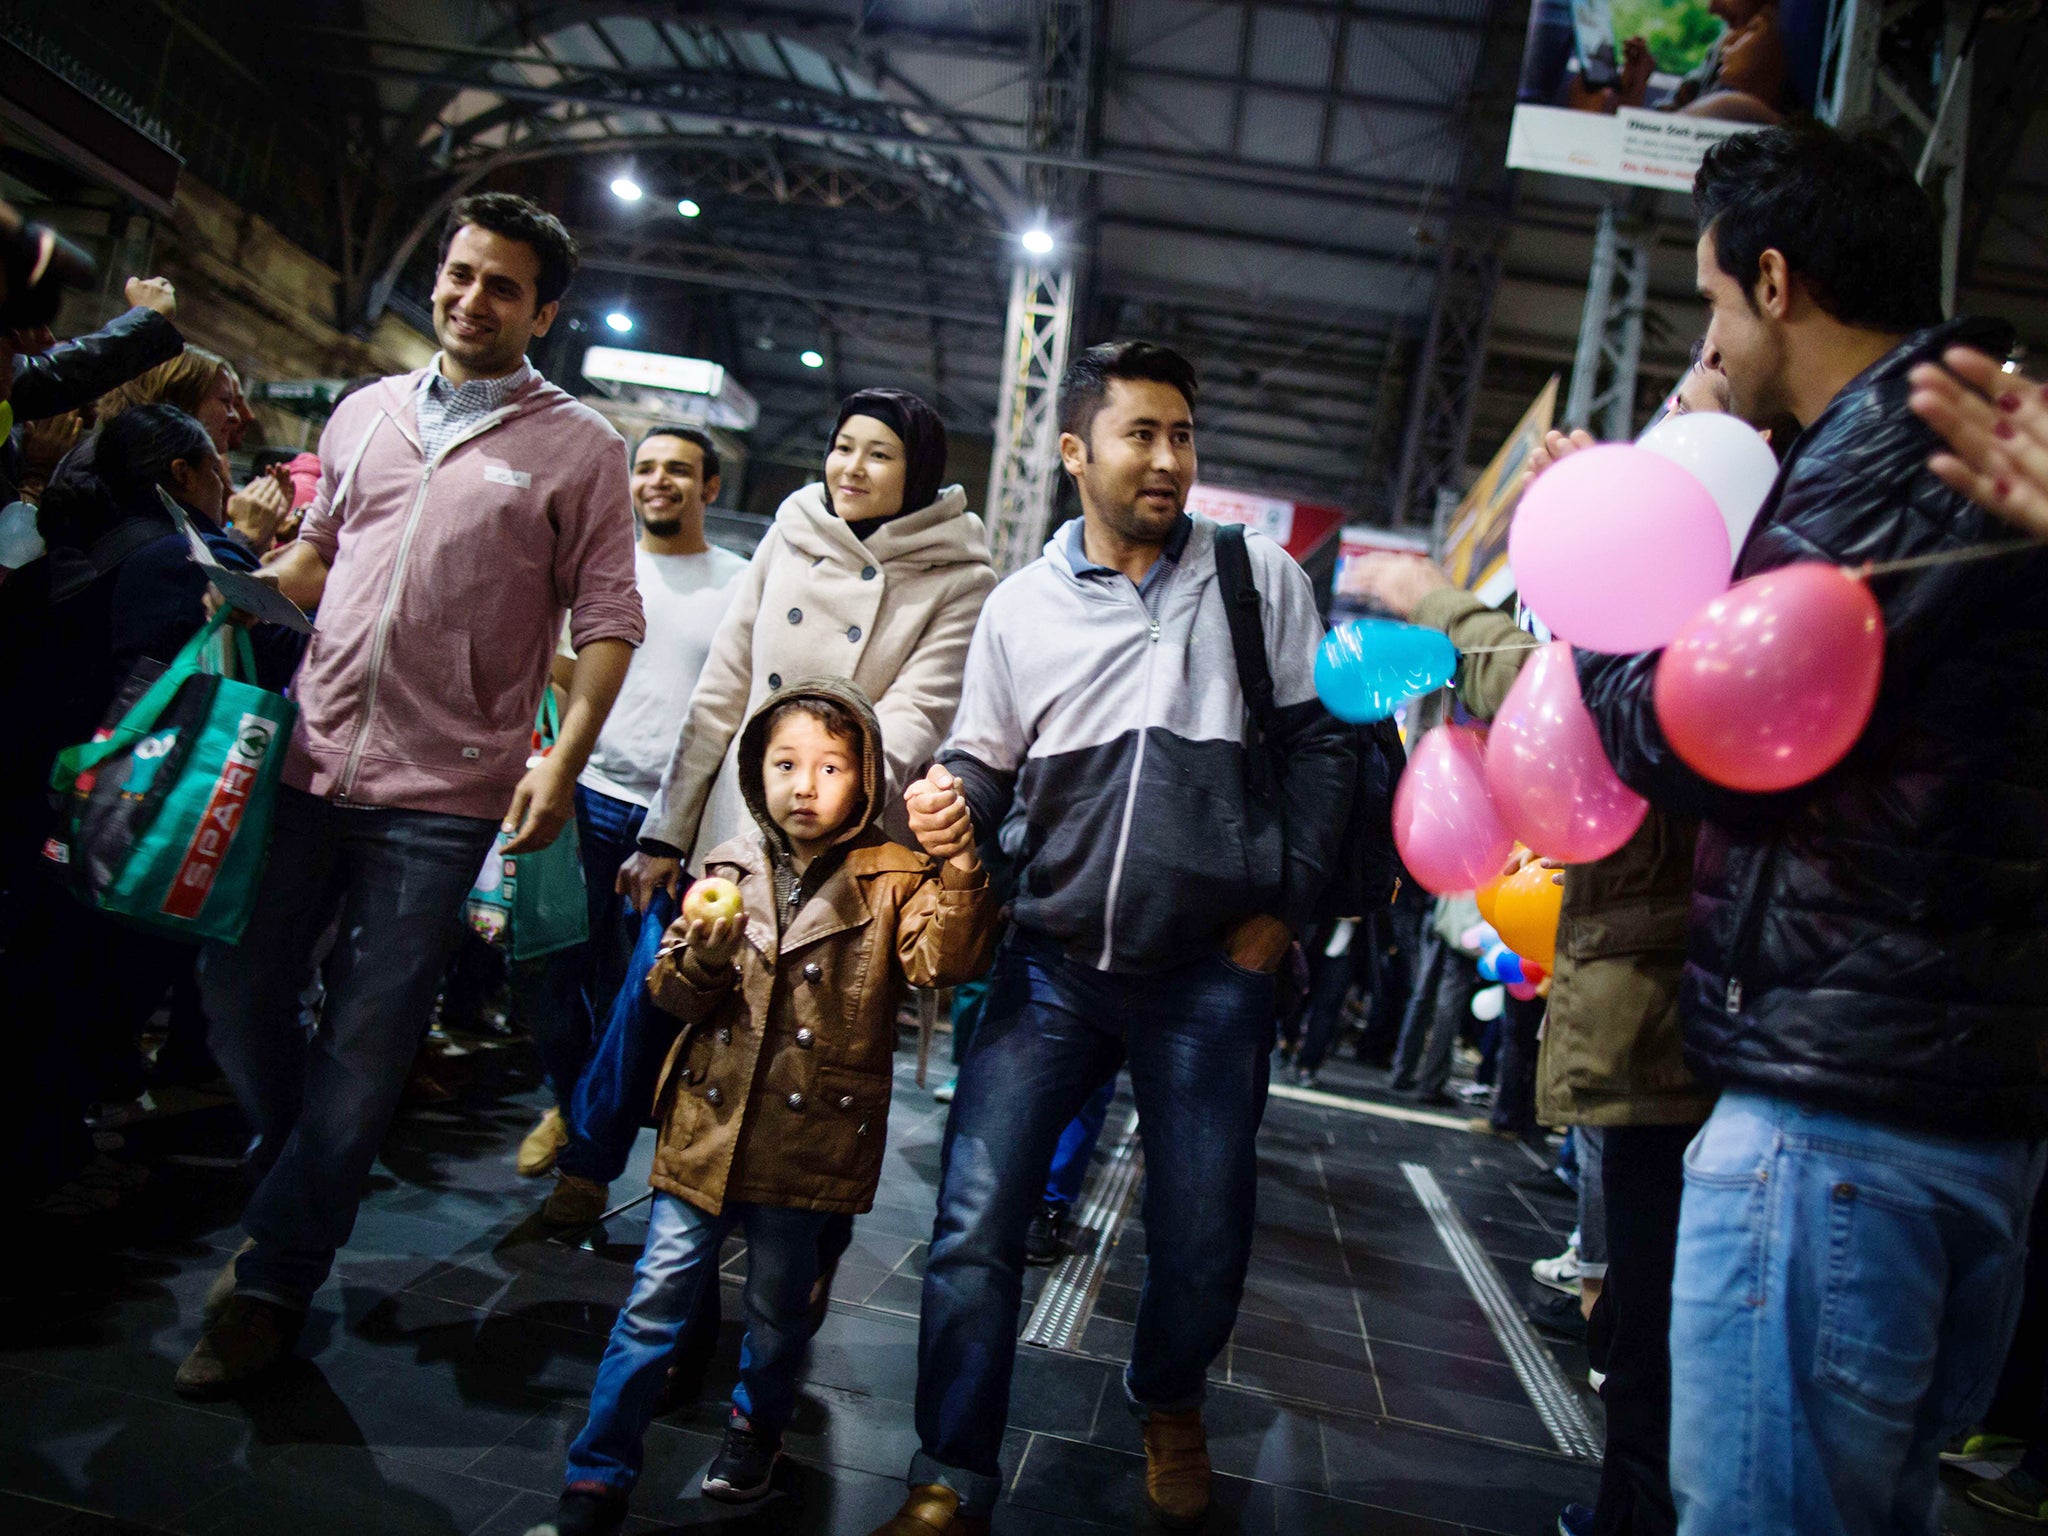 Germany has been criticised by some EU states for its 'open door' policy to refugees